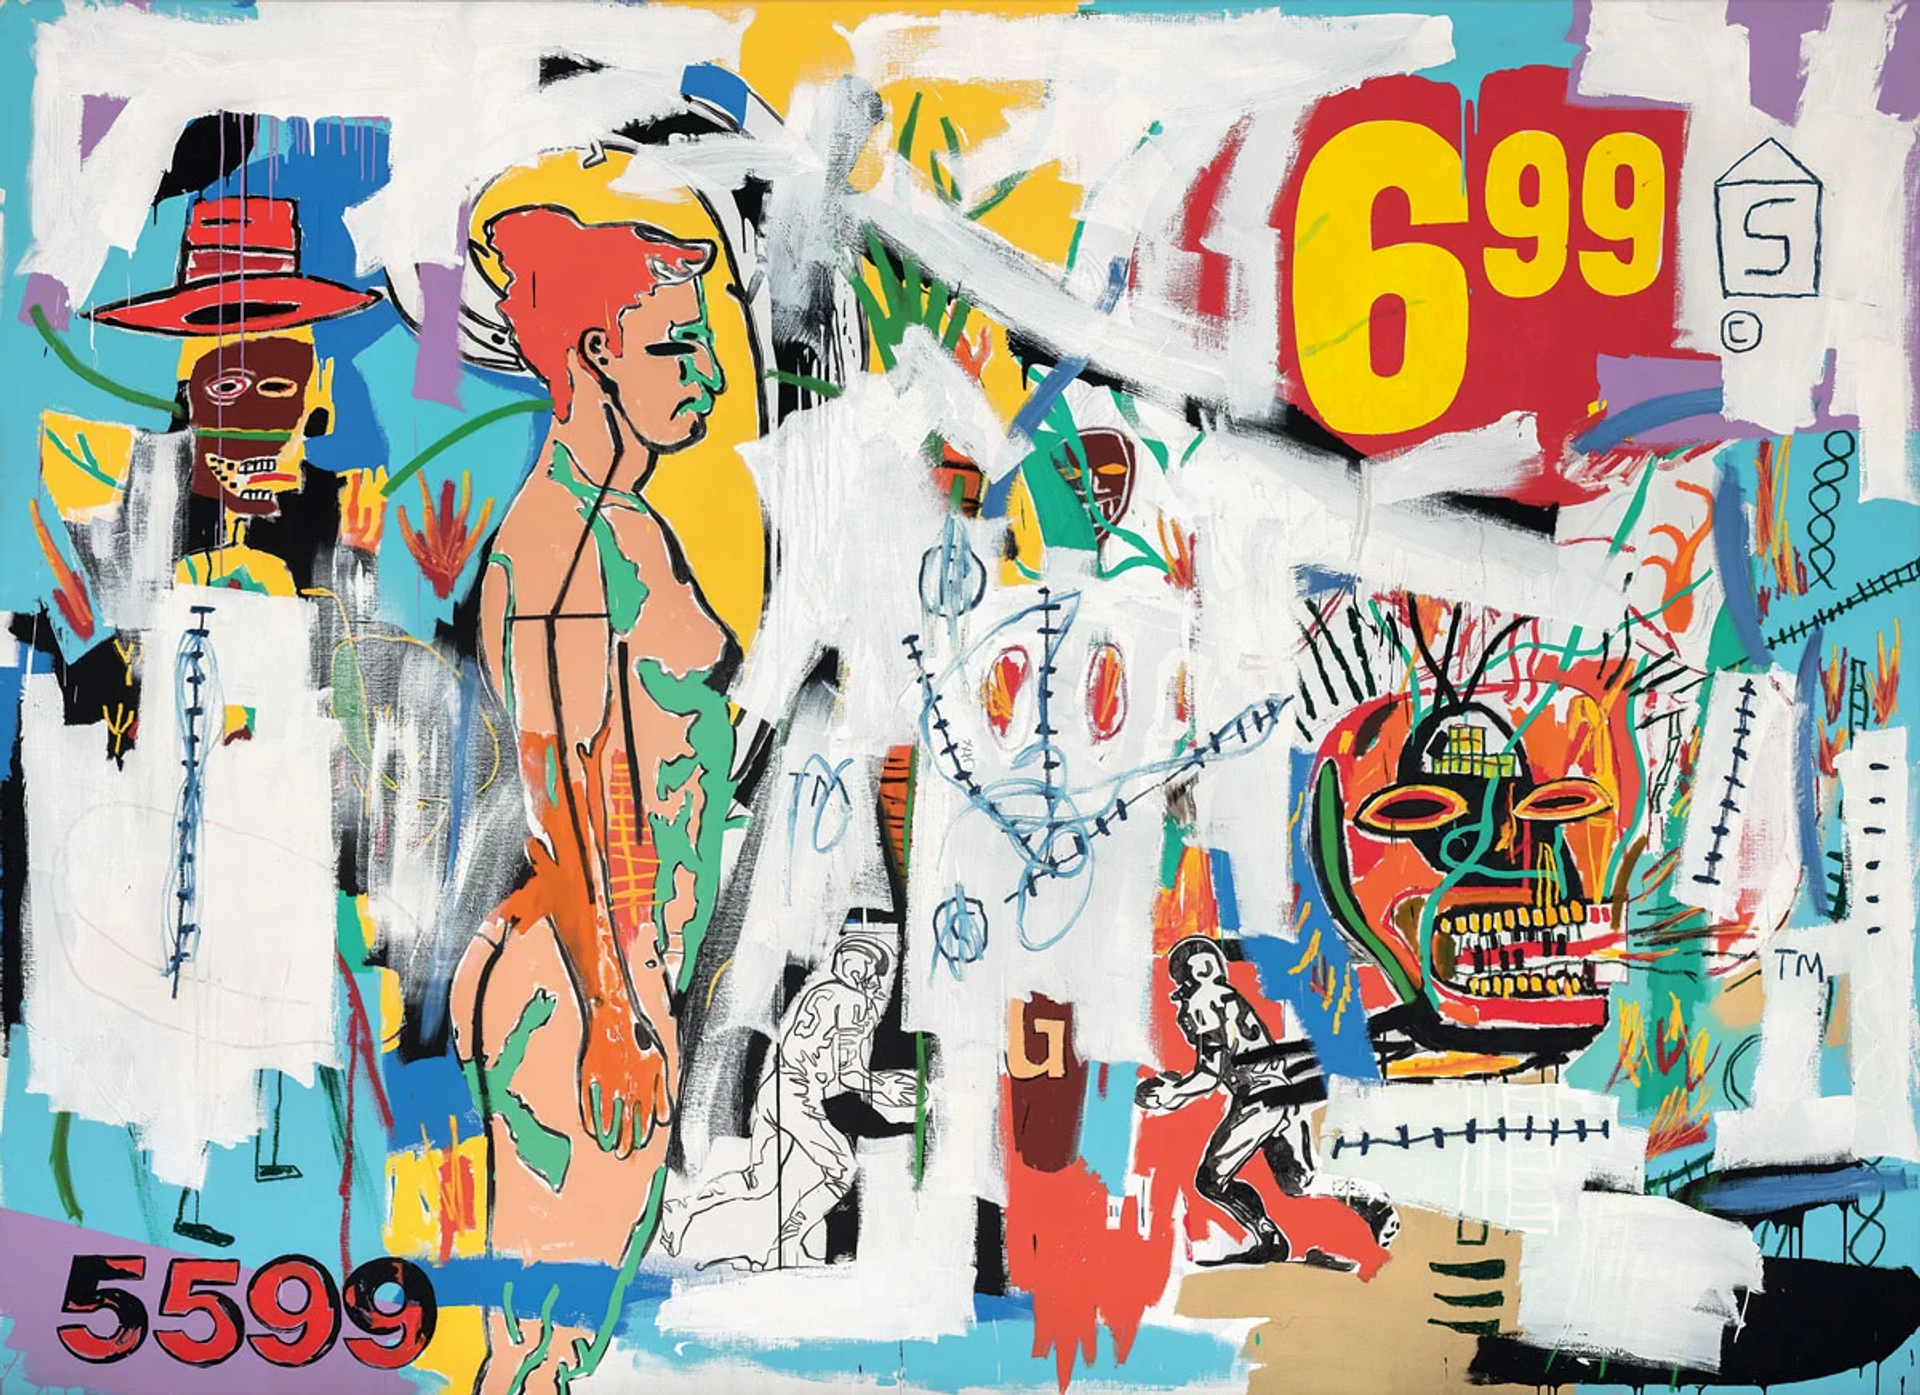 Collage style painting of two male figures, one skull head and text of price displays